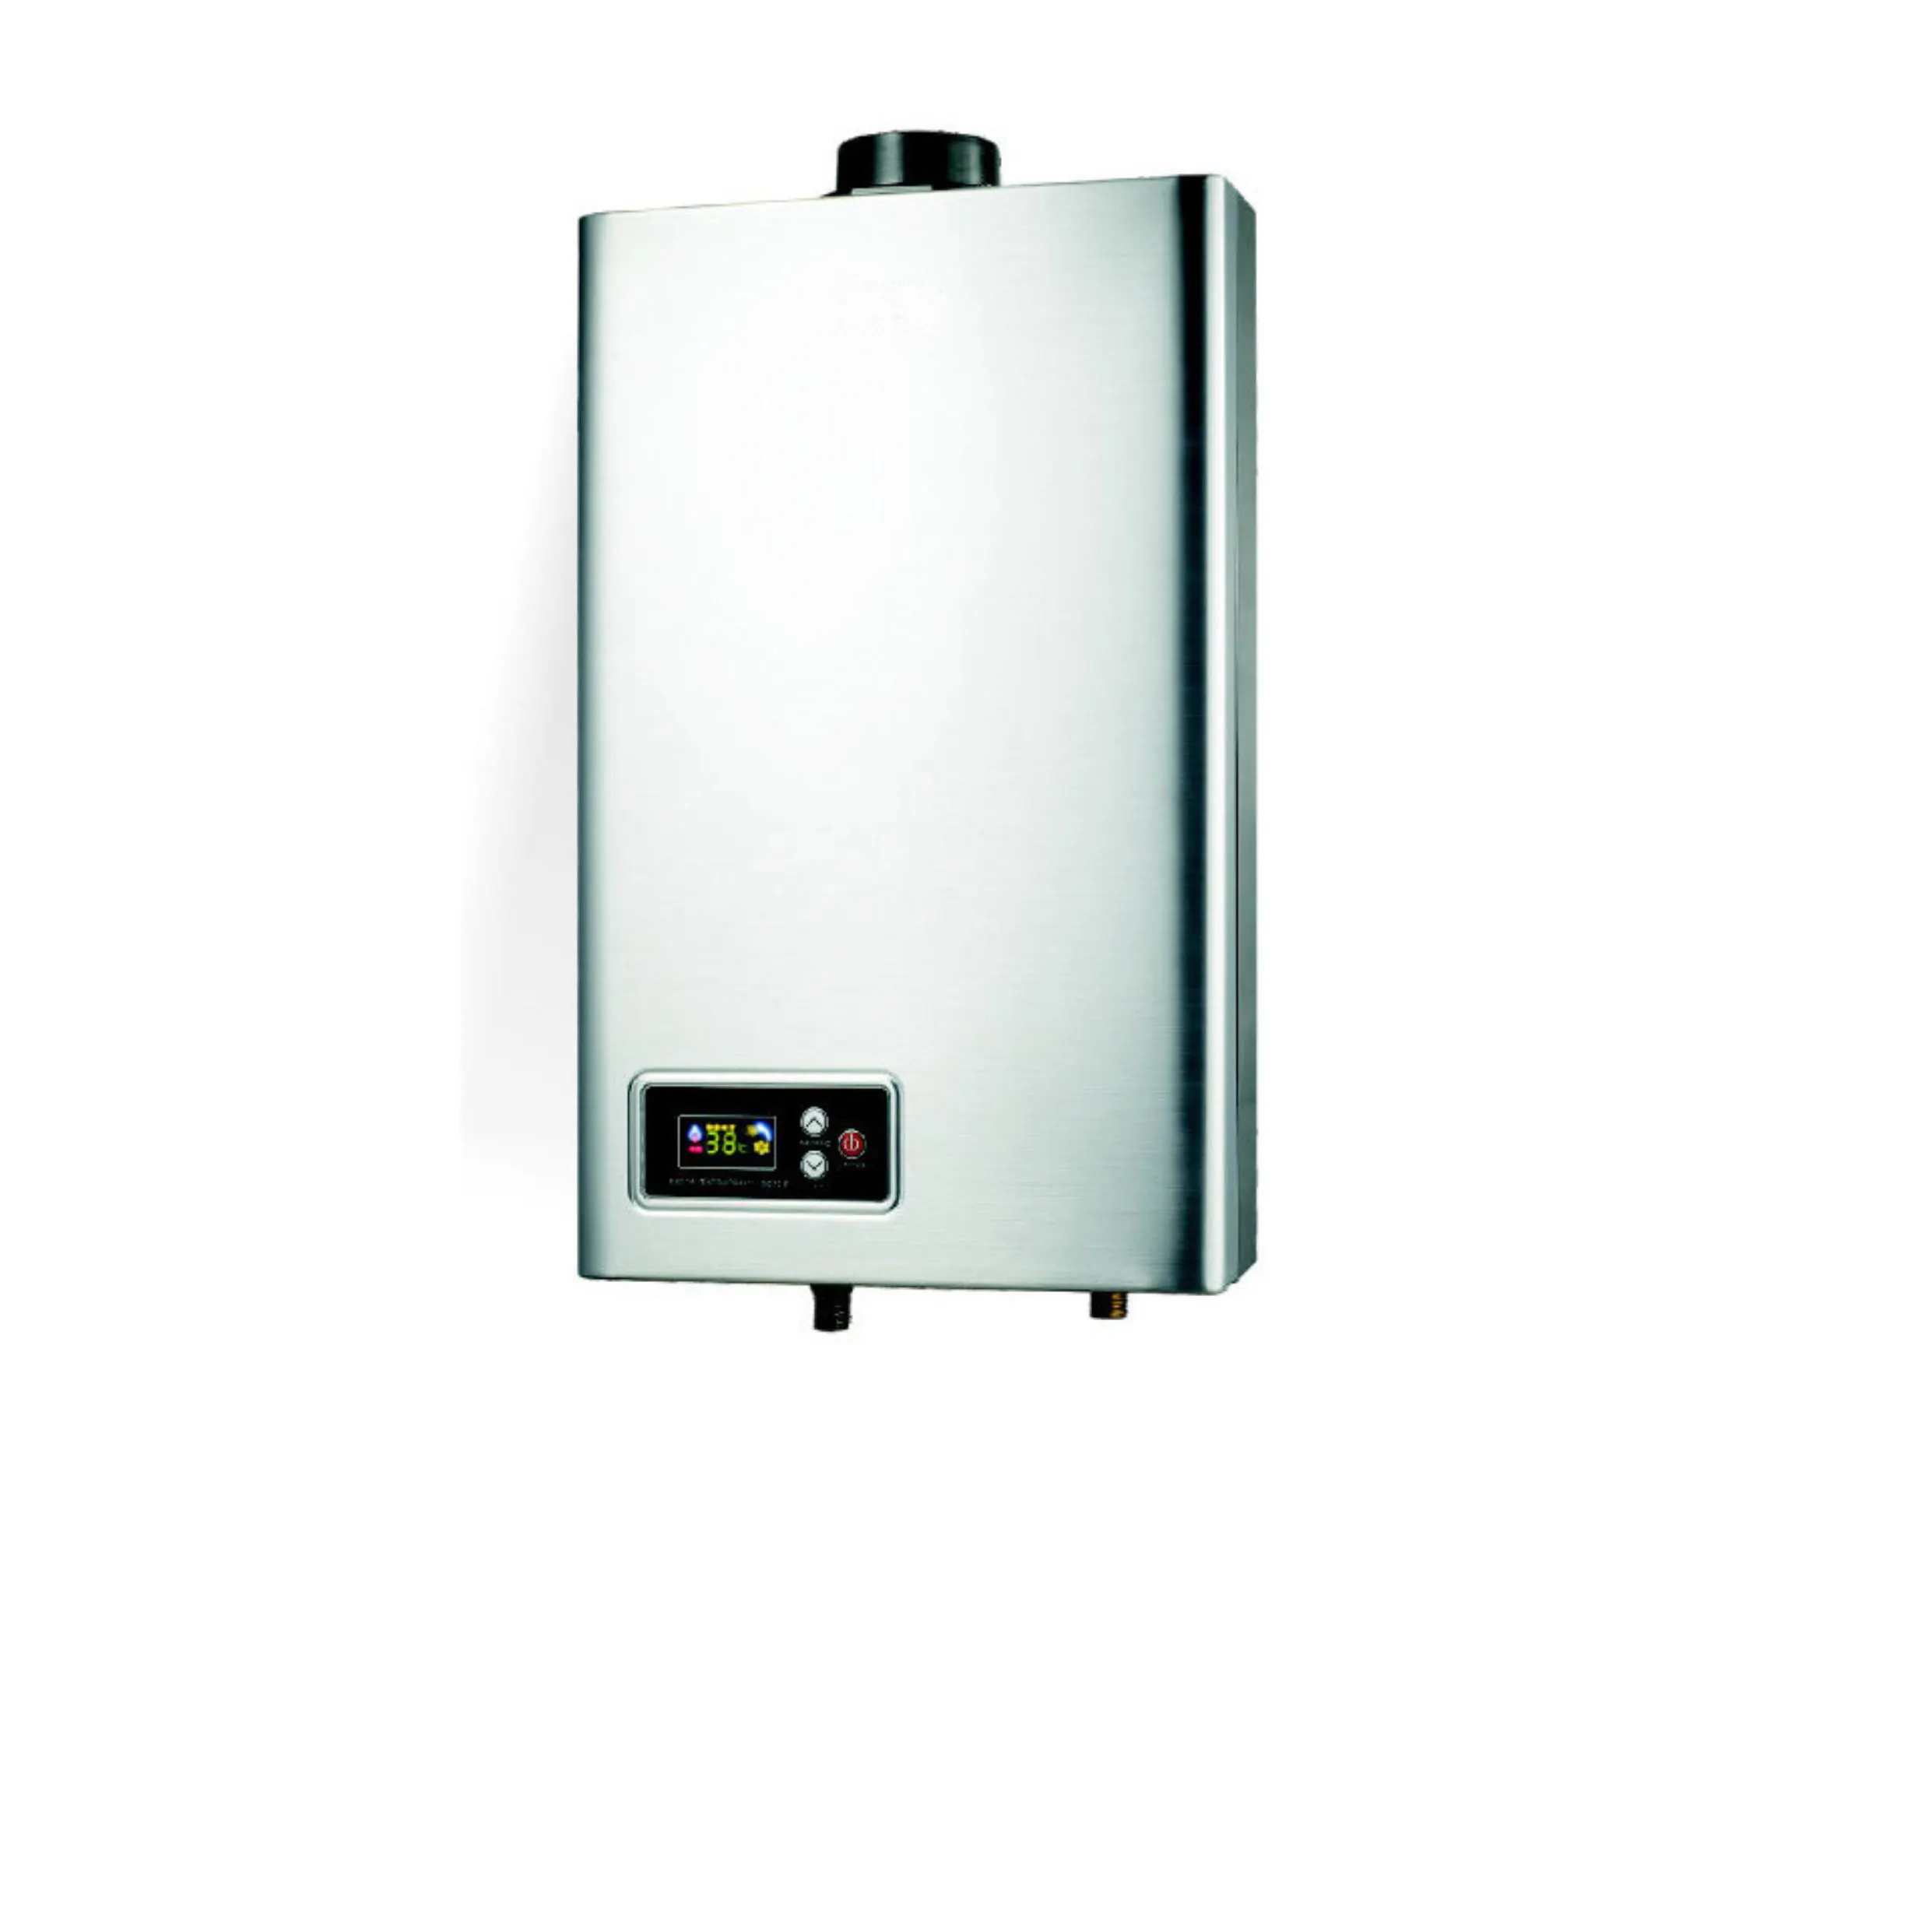 China supplier factory Endless hot water tankless instant gas water heater